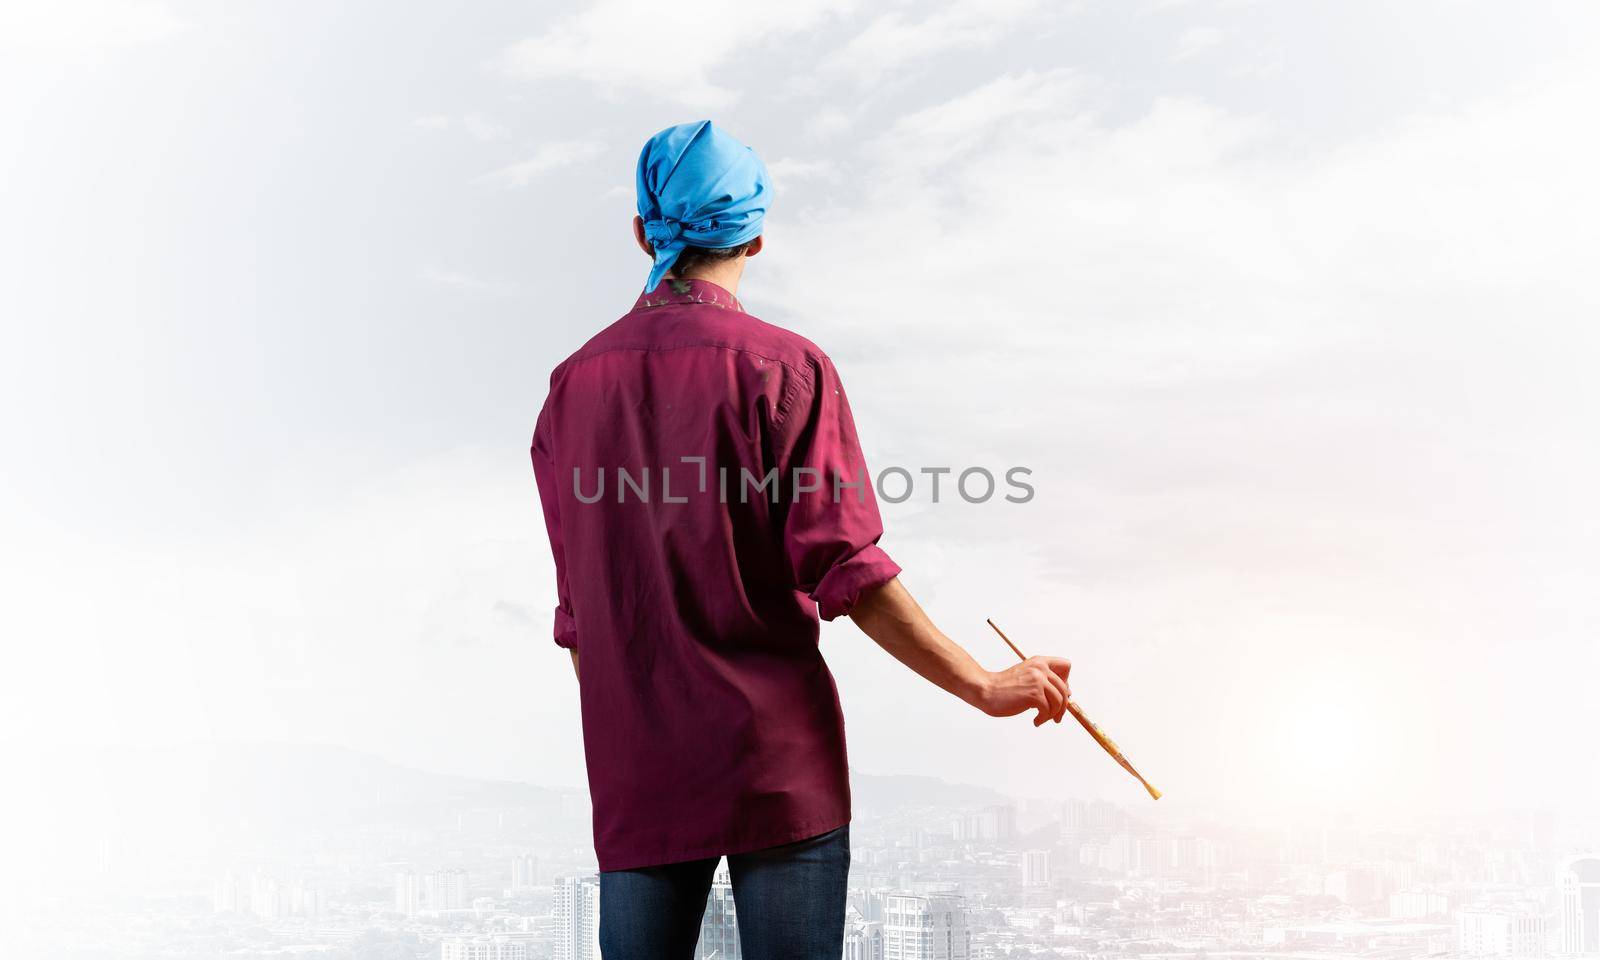 Young male painter artist holding paintbrush. Back view of painter in shirt and bandana on background cloudy sky and cityscape. Creative hobby and artistic occupation. Art school courses concept.